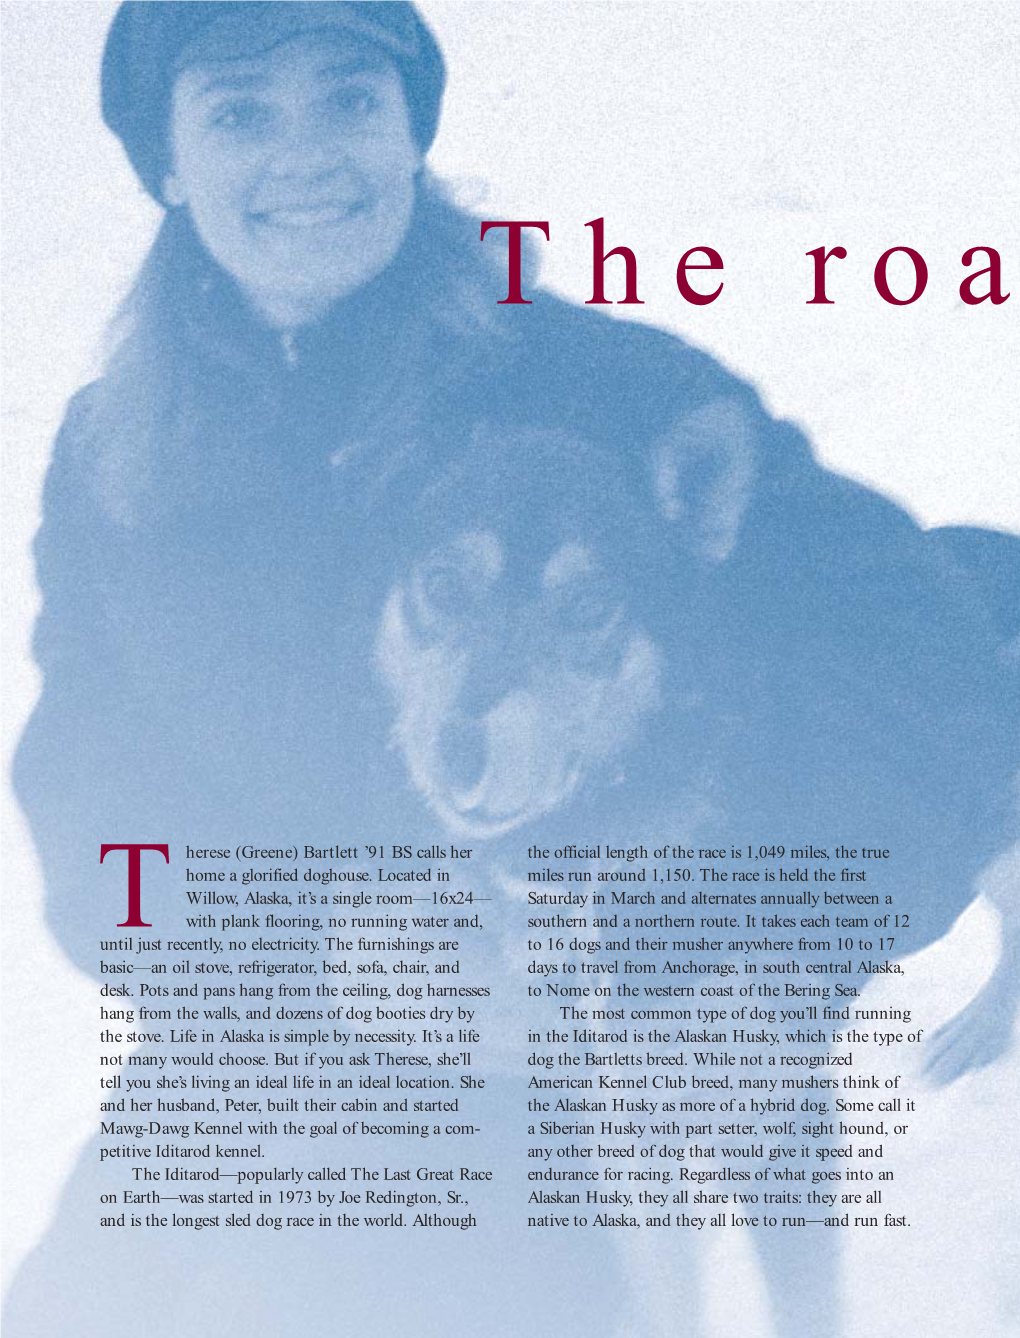 (Greene) Bartlett ’91 BS Calls Her the Official Length of the Race Is 1,049 Miles, the True Home a Glorified Doghouse